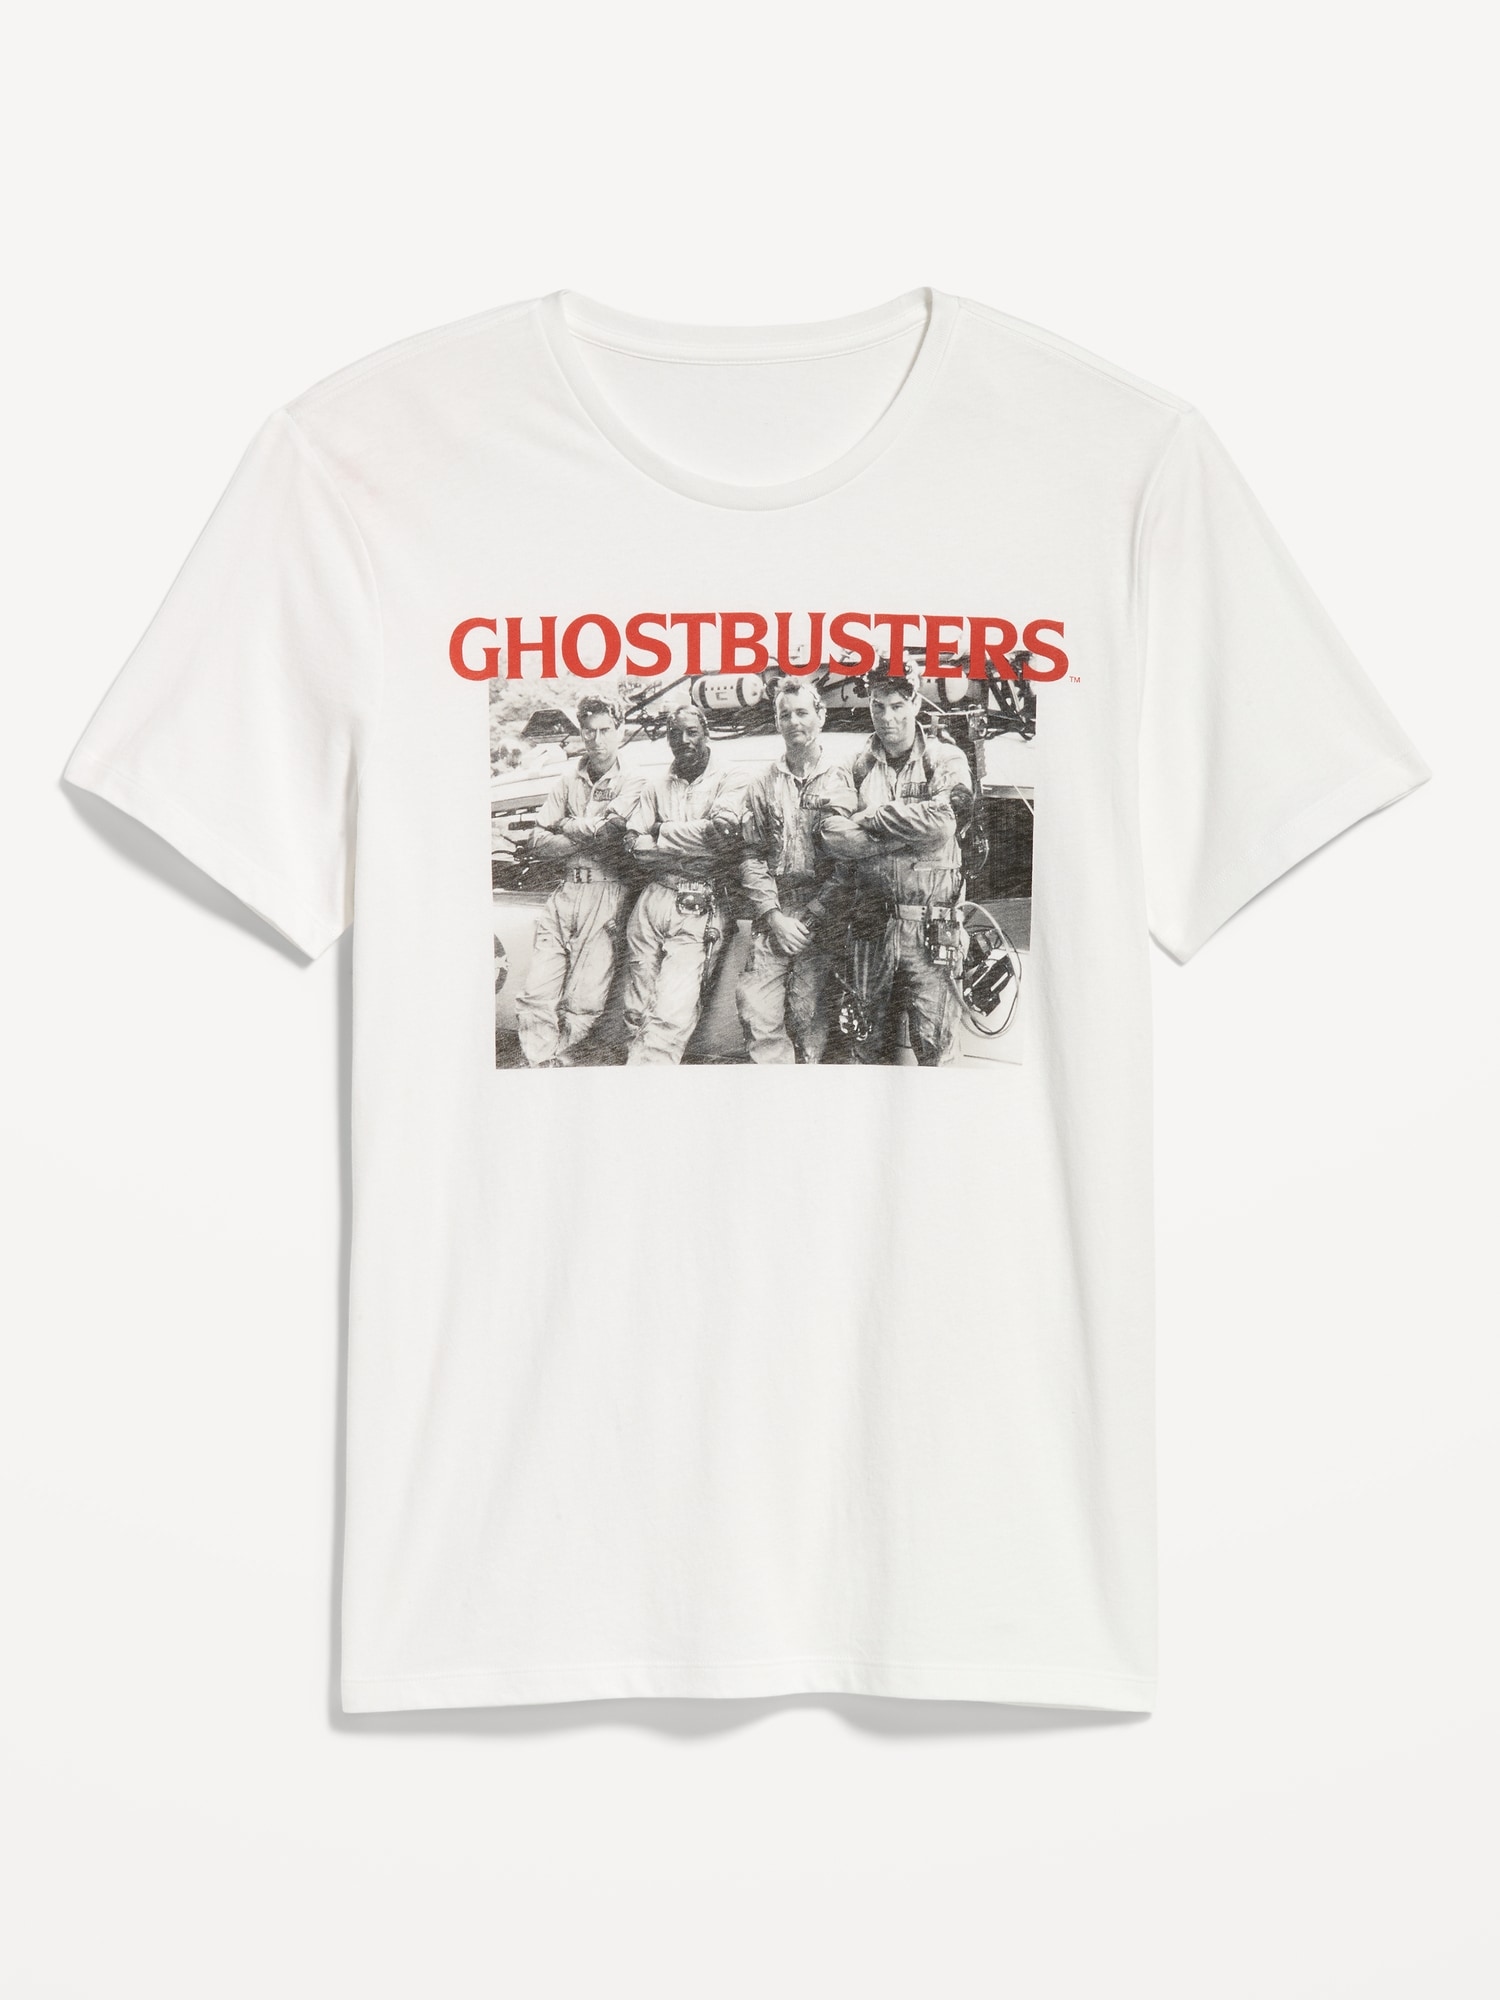 Ghostbusters™ T-Shirt